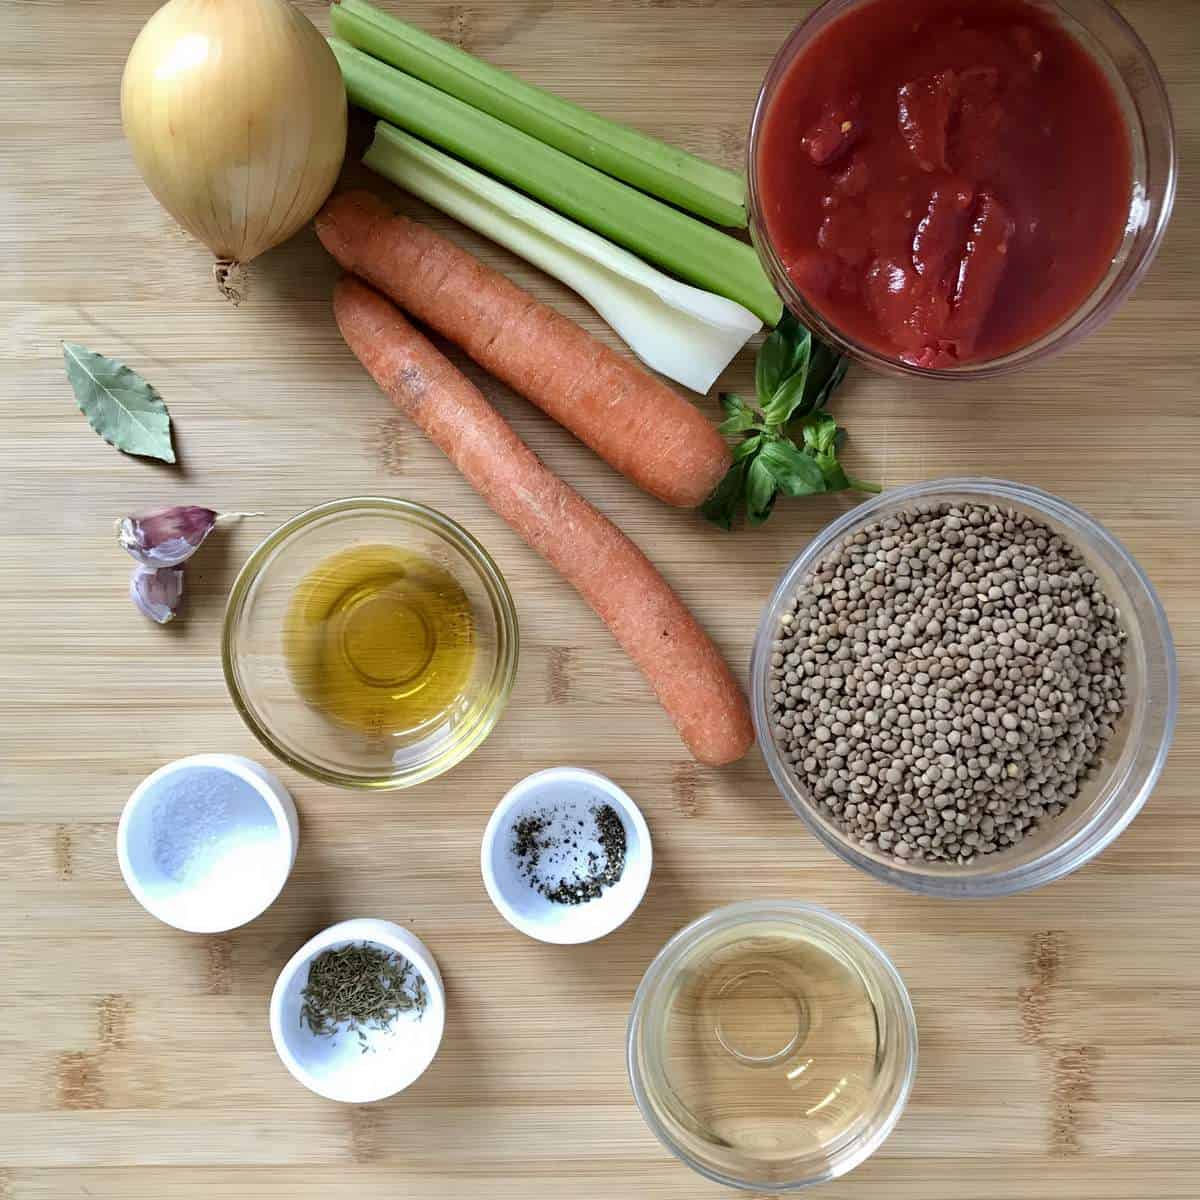 The ingredients needed to make lentil soup on a wooden board.